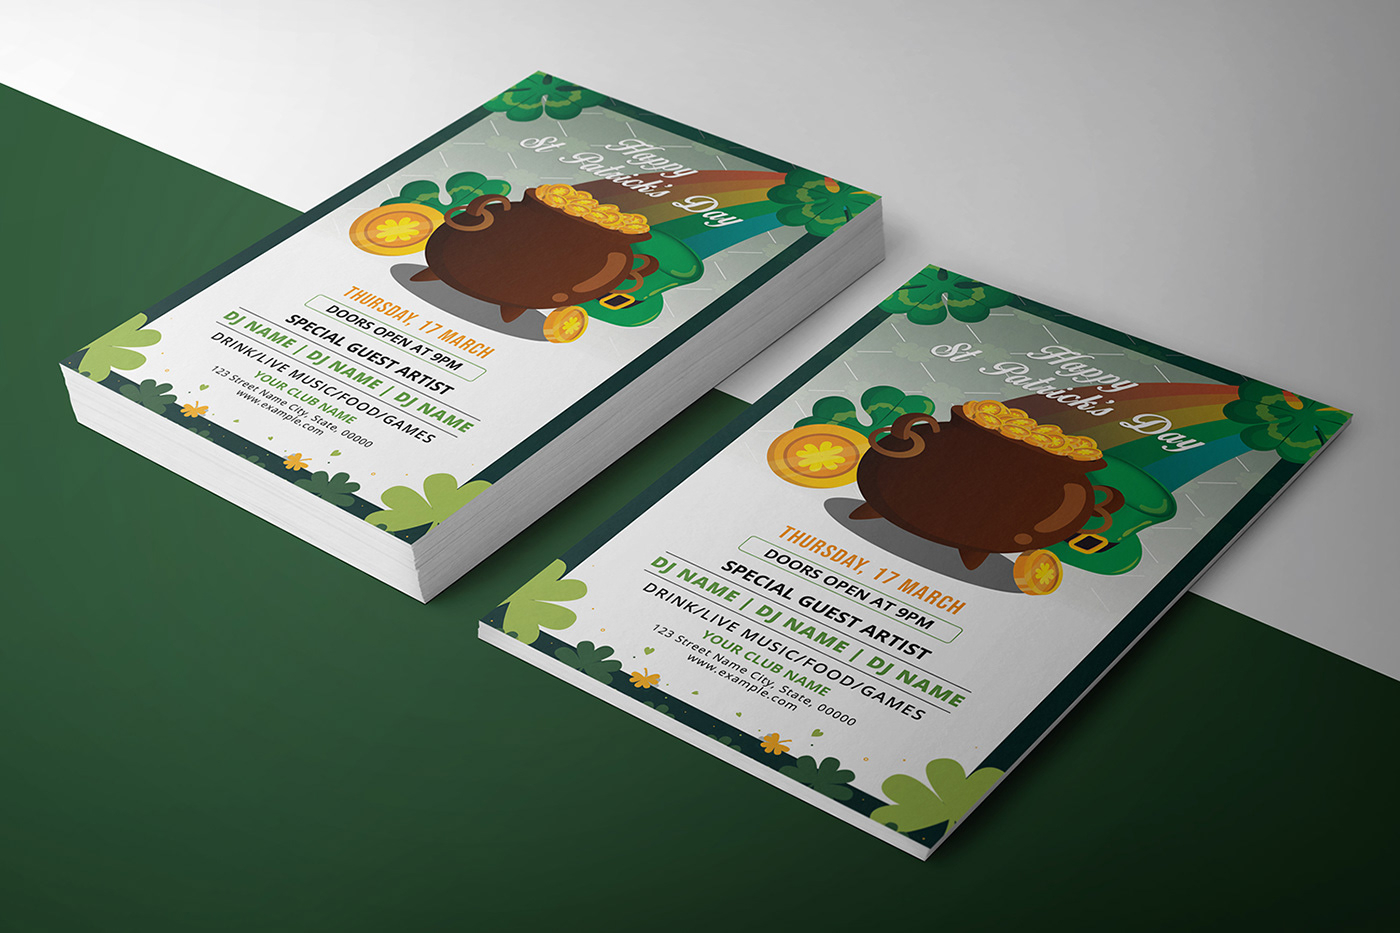 party flyer St Patricks Day ms word psd irish party invitation template paddy day patrick day celebration patrick day event saint patrick’s day